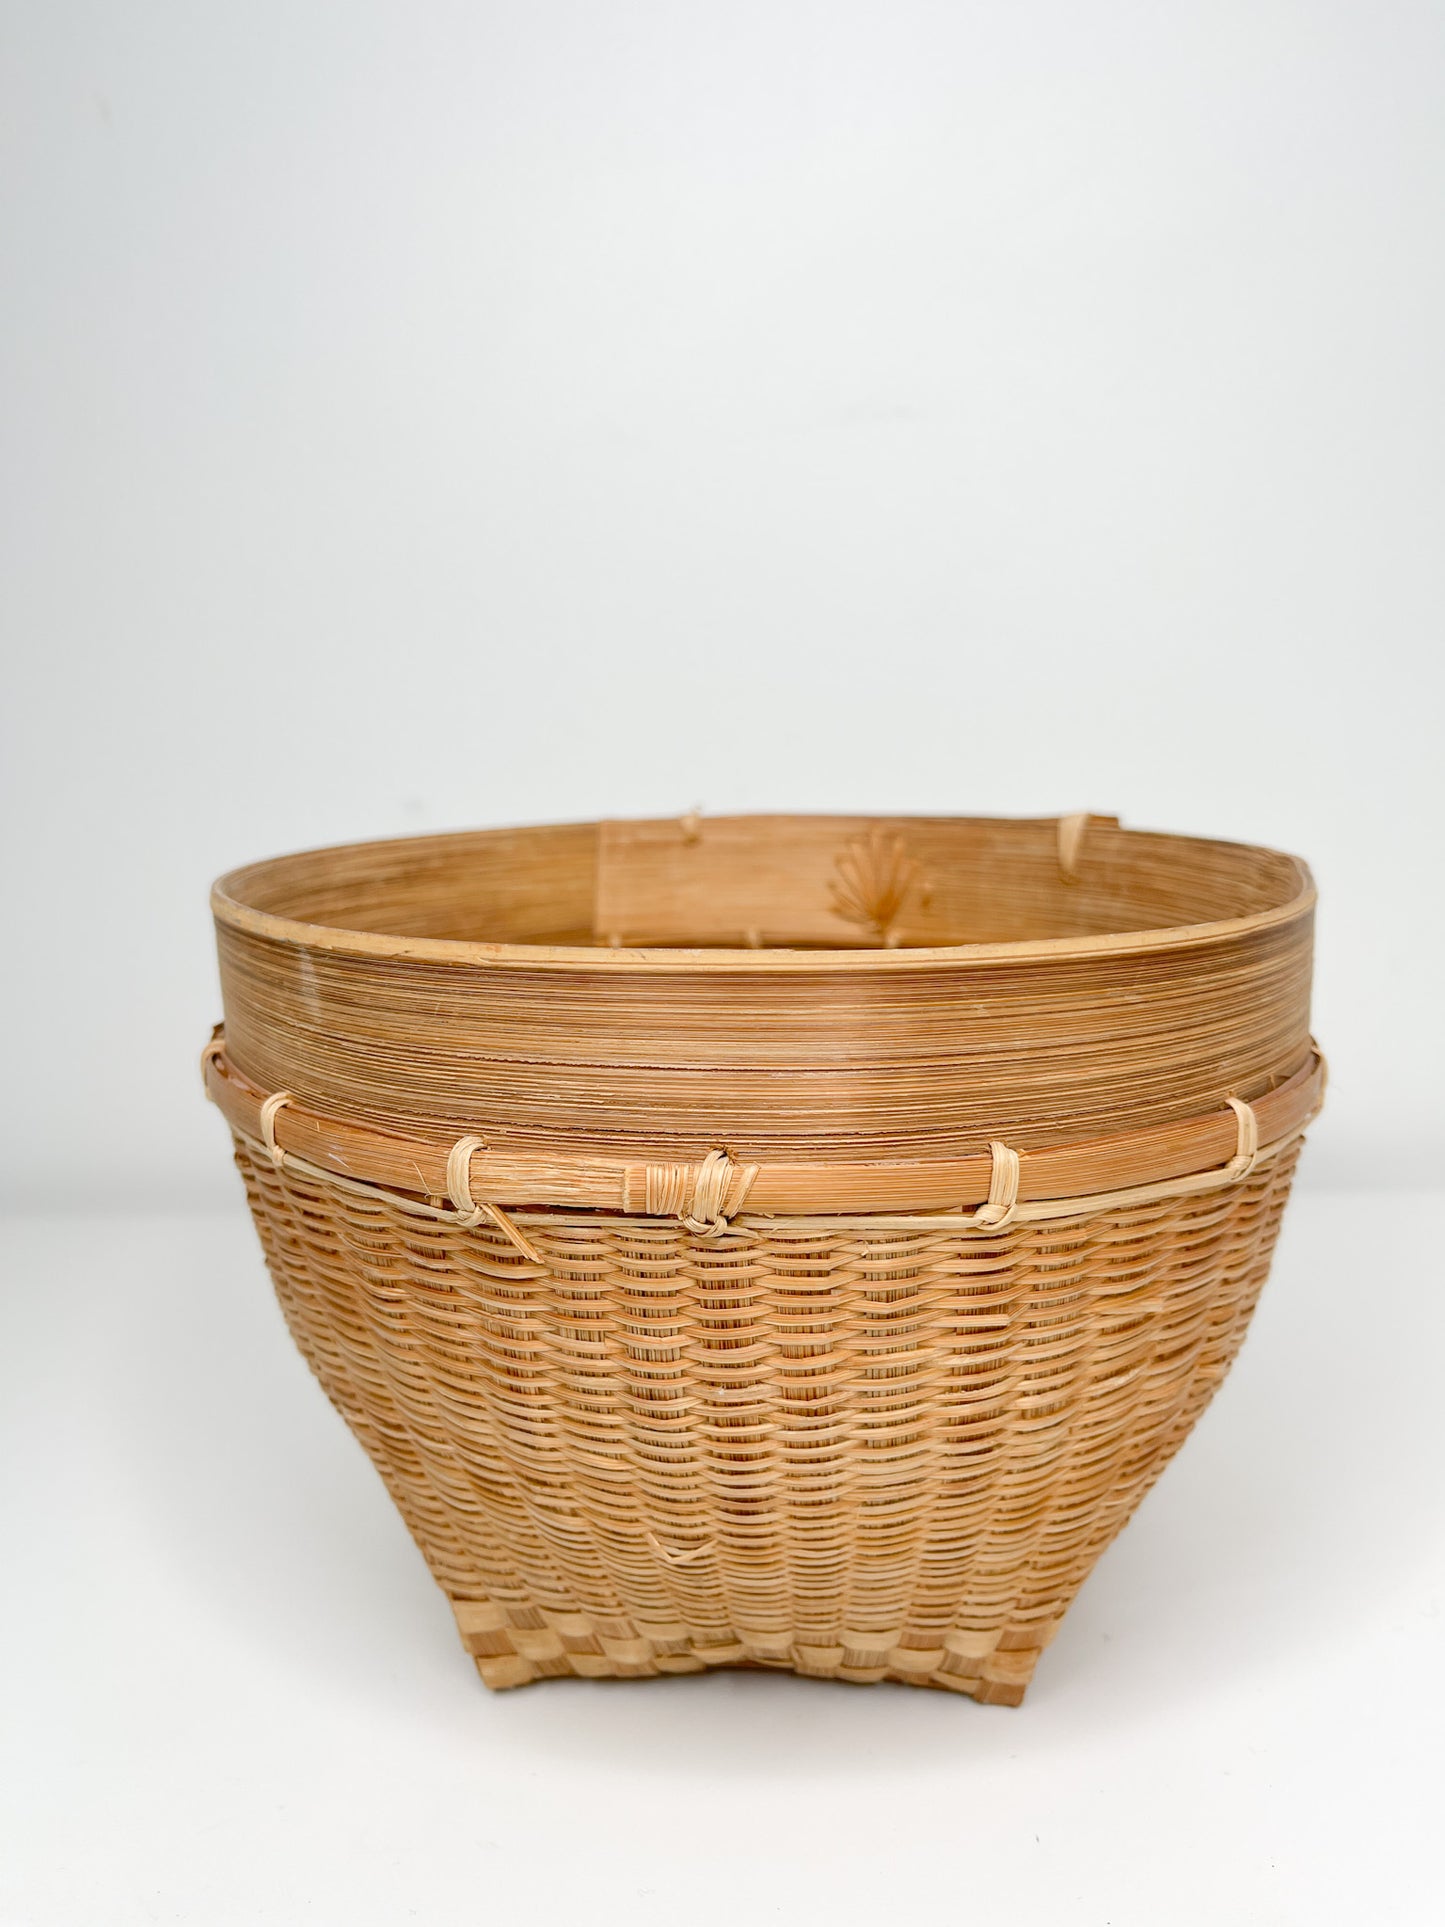 Curated Lot of Three Vintage Baskets |